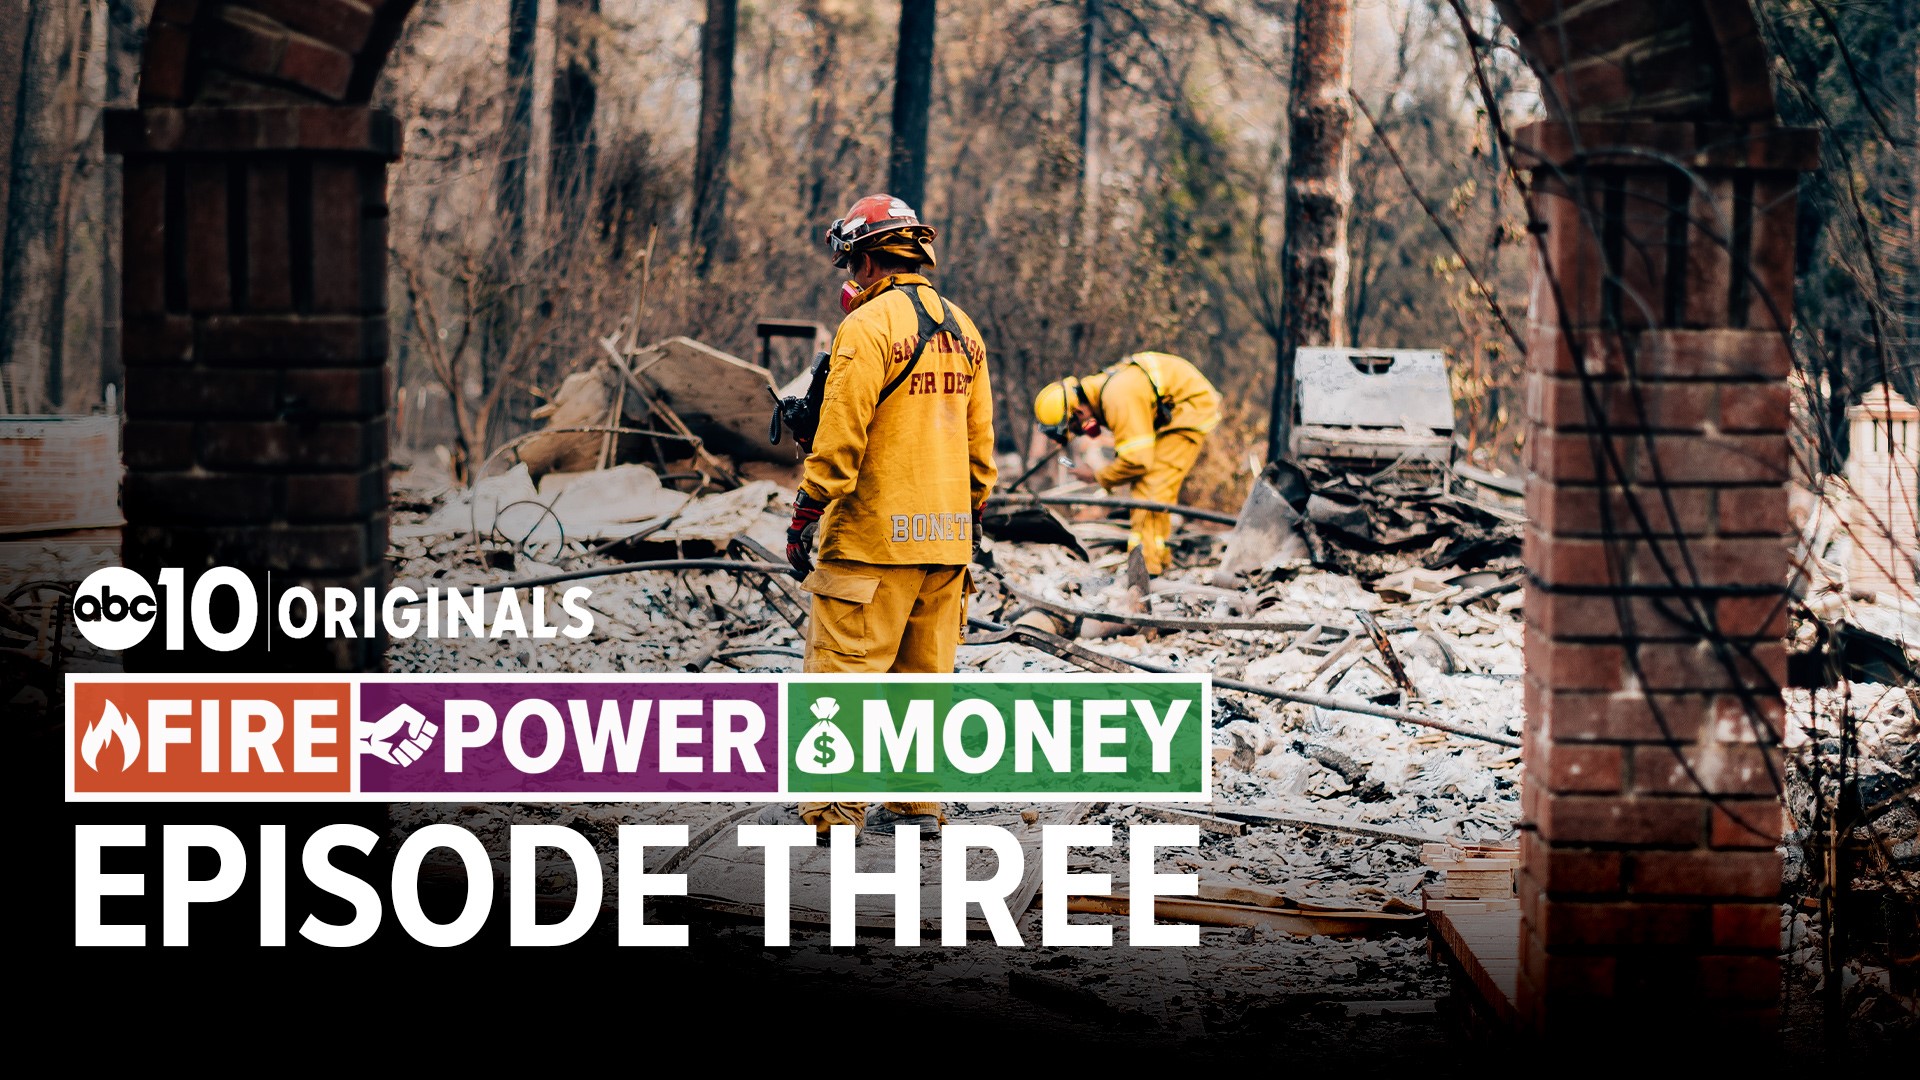 California’s wildfire crisis is going to cost all of us. Two years of wildfires started by PG&E could cost $30 billion — that’s $750 per person in the state of California. 

The state also needs to plan for the cost of future fires and the fact that insurance companies are refusing to cover California utilities. 

Will there be money left to fix our forests? What will it take to buy us some safety from megafires in the future?